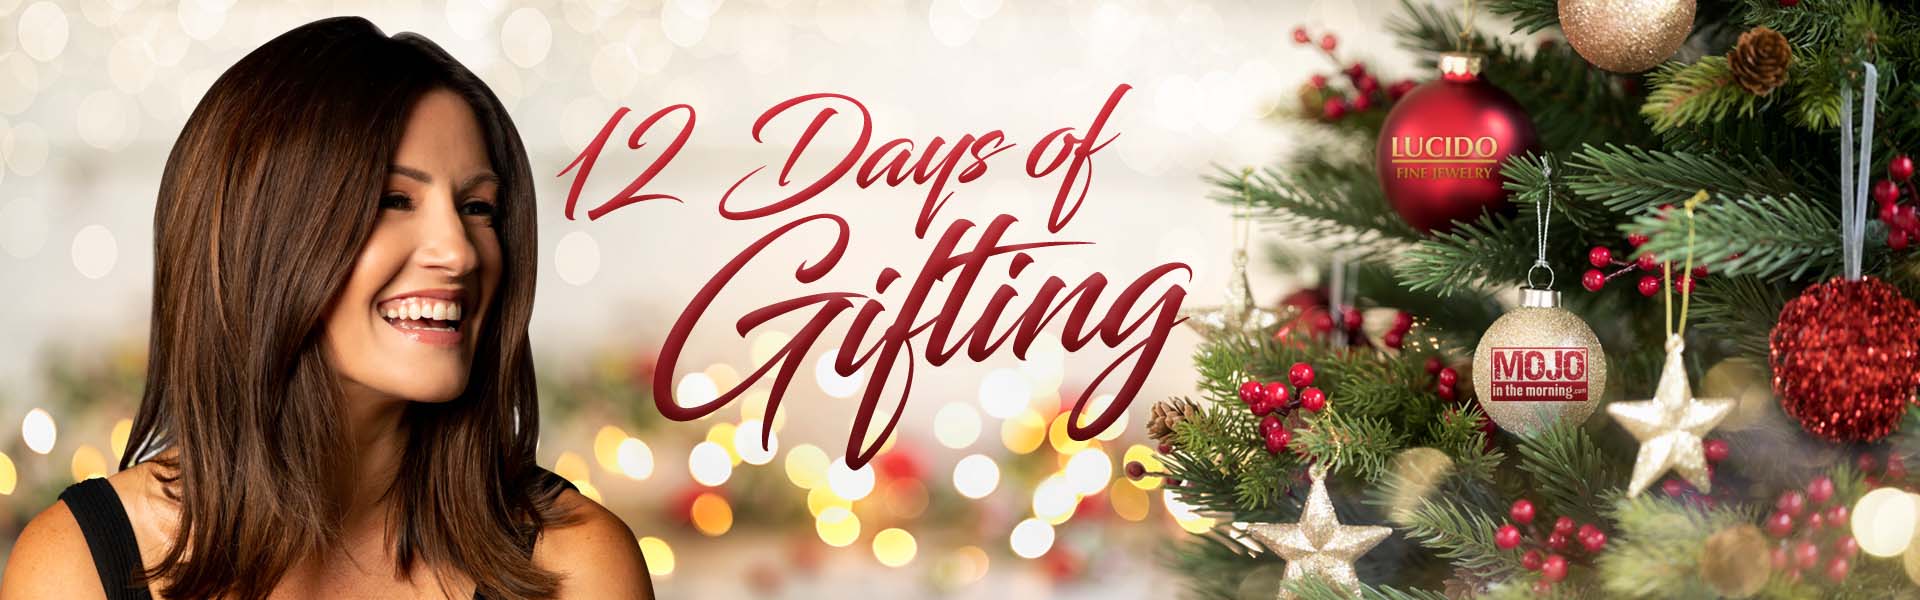 Lucido Fine Jewelry - 12 Days of Gifting 2021